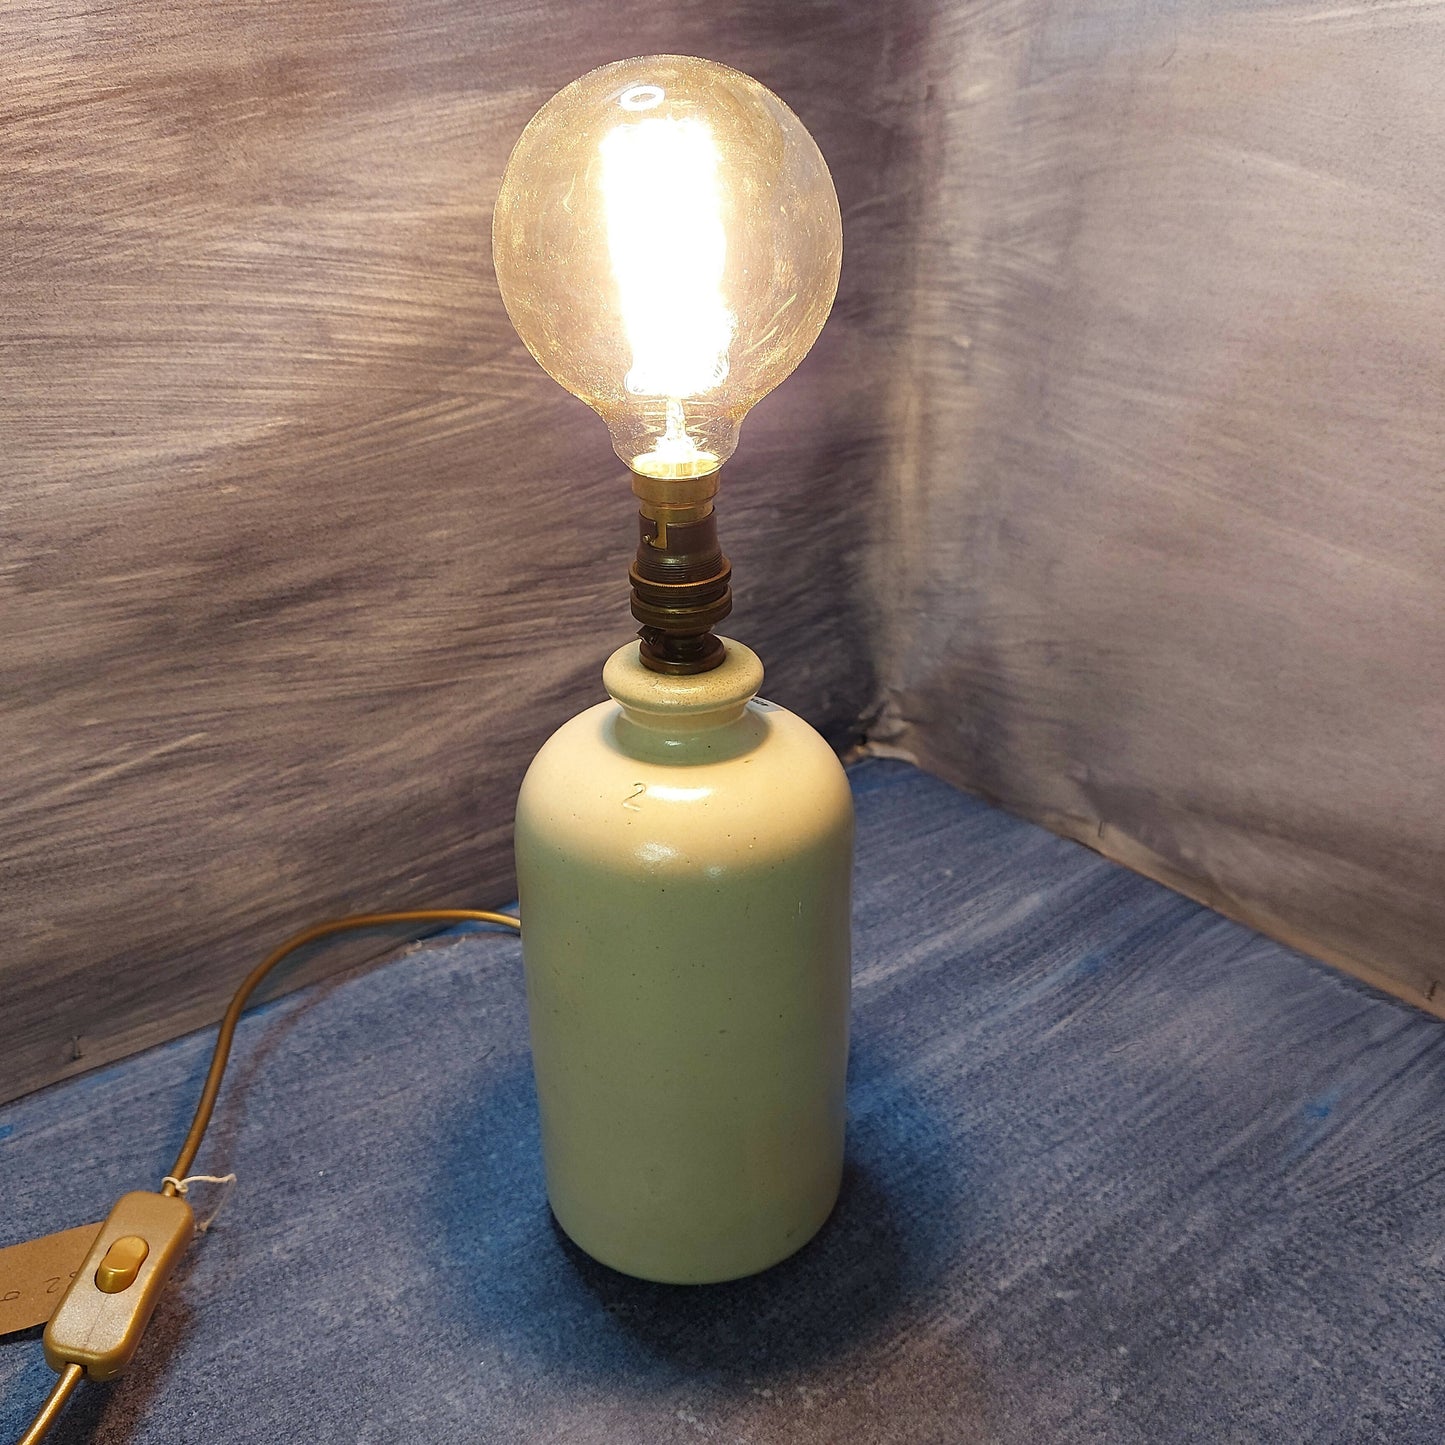 DECORATIVE COUNTRY KITCHEN STYLE EARTHENWARE BOTTLE TABLE LAMP.